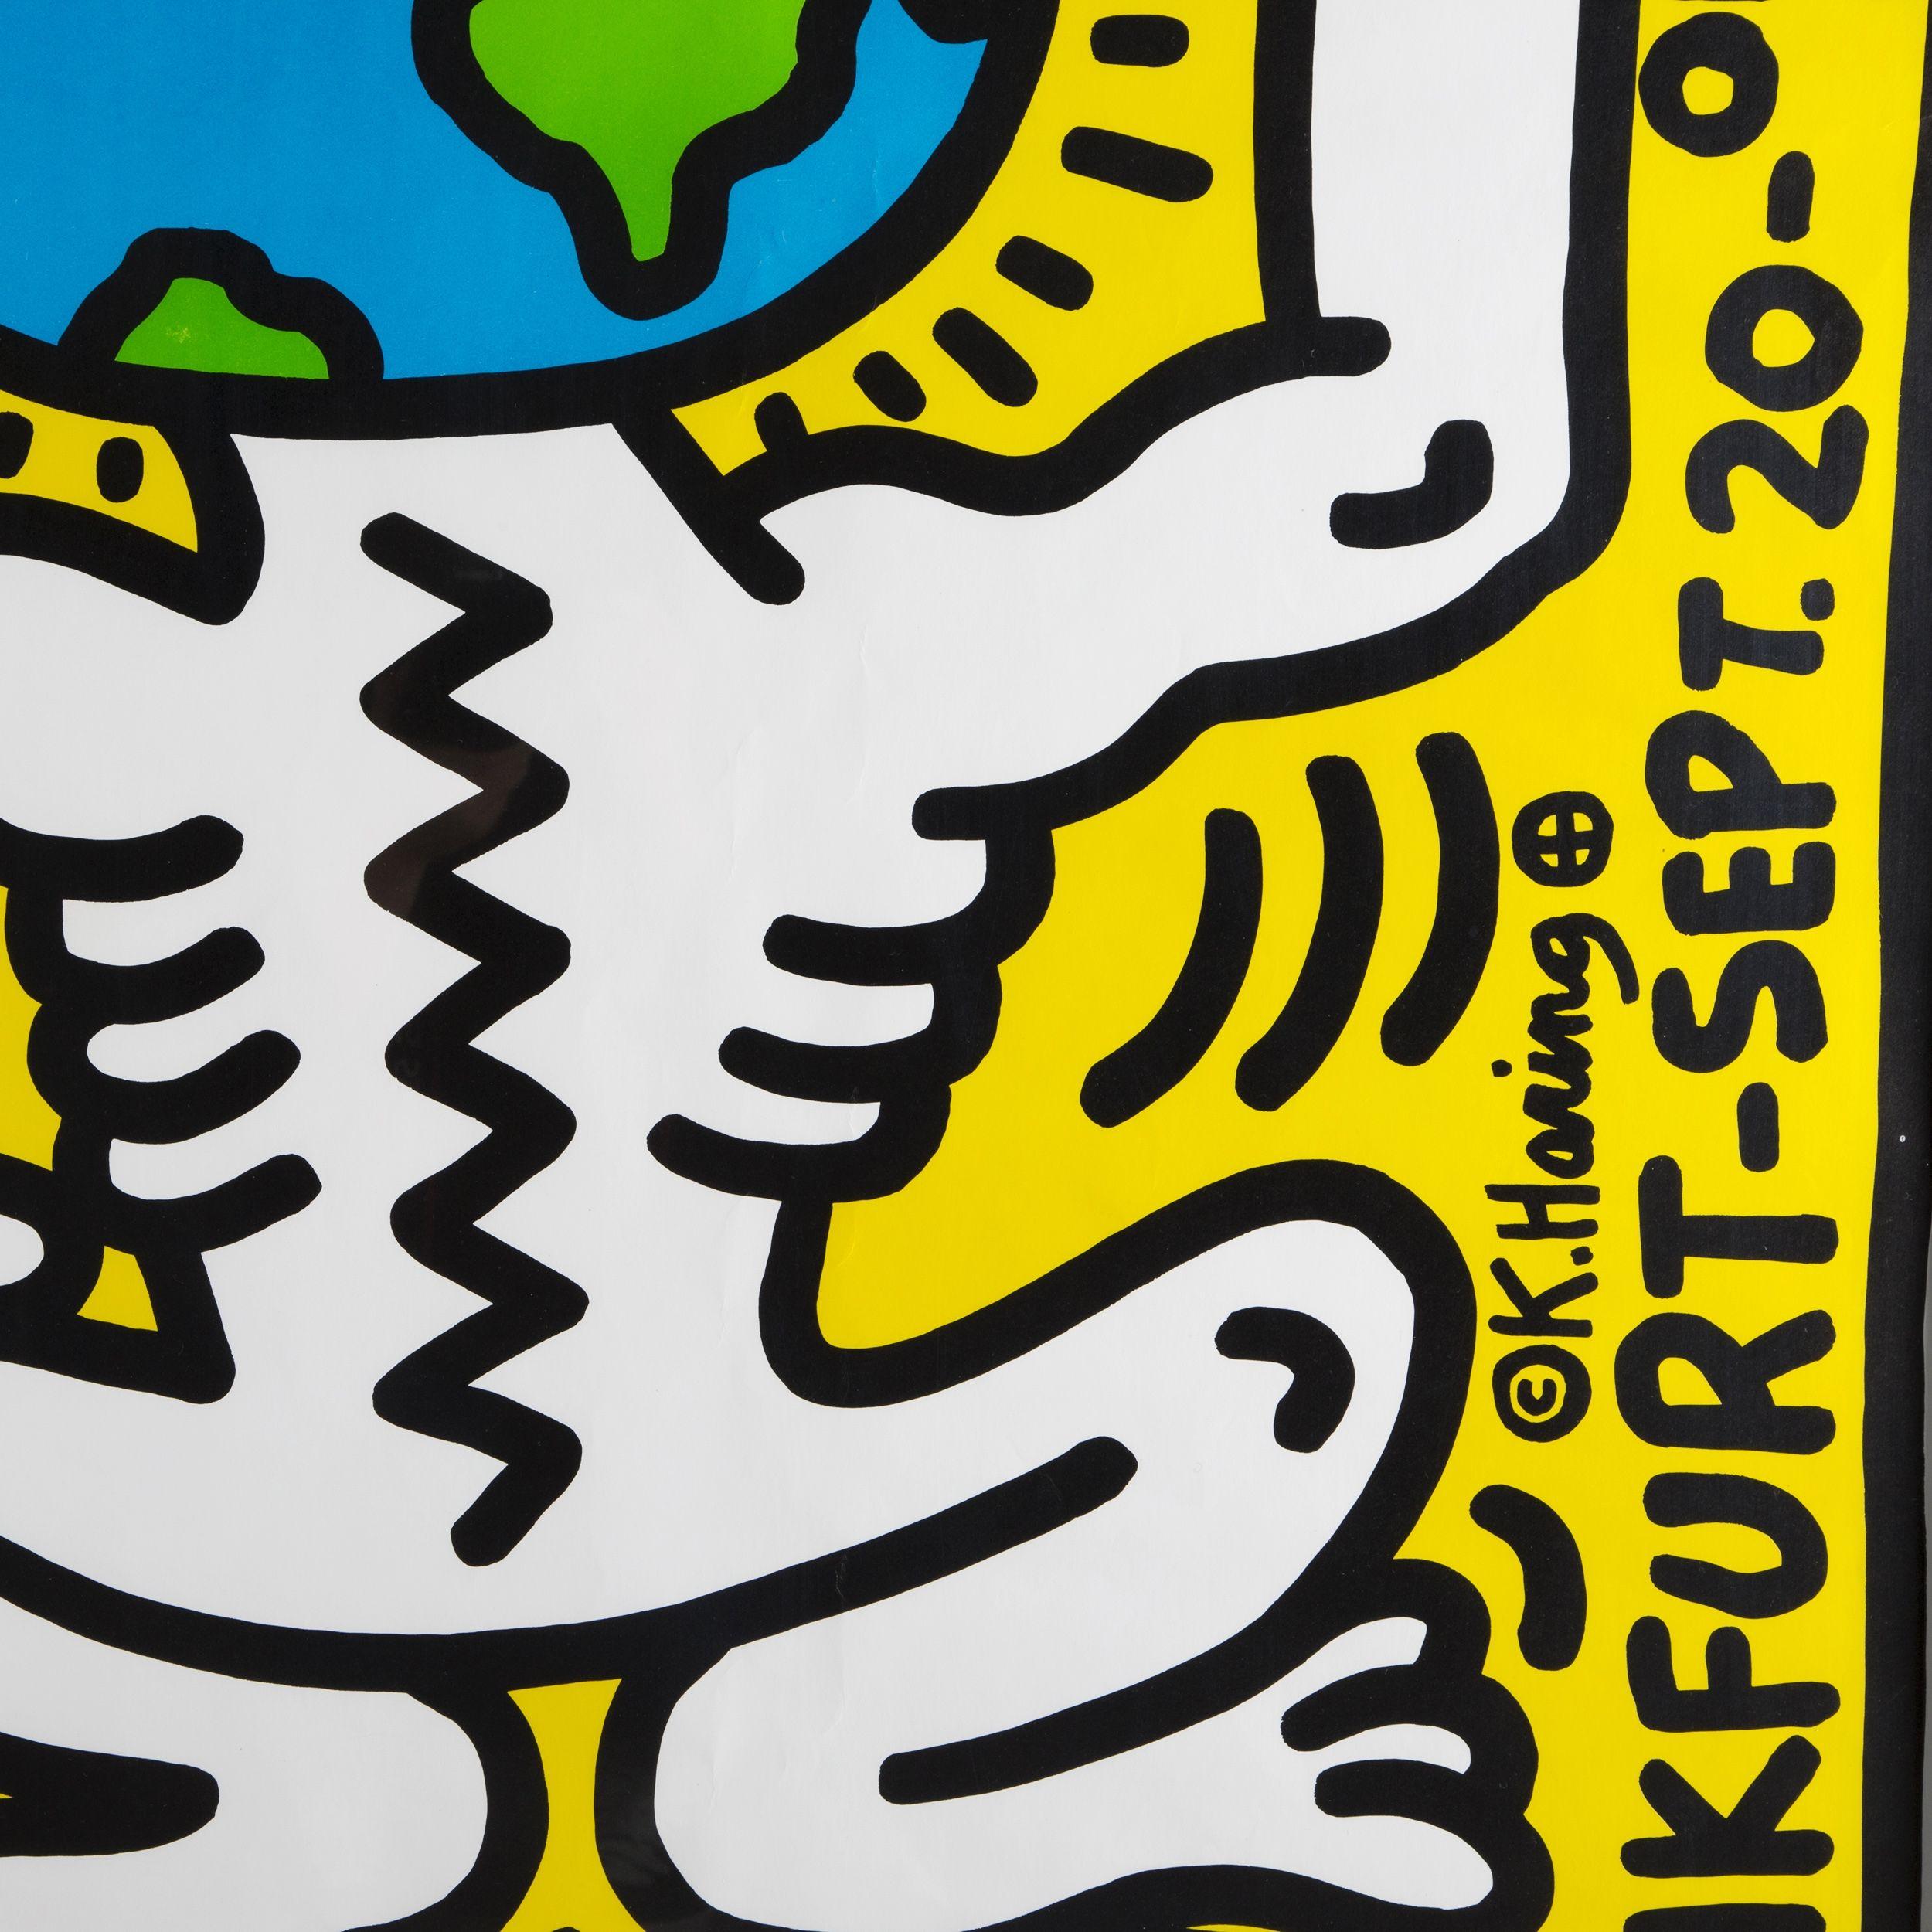 Earth Man (Theater Der Welt, 1985) - screen print - Print by (after) Keith Haring